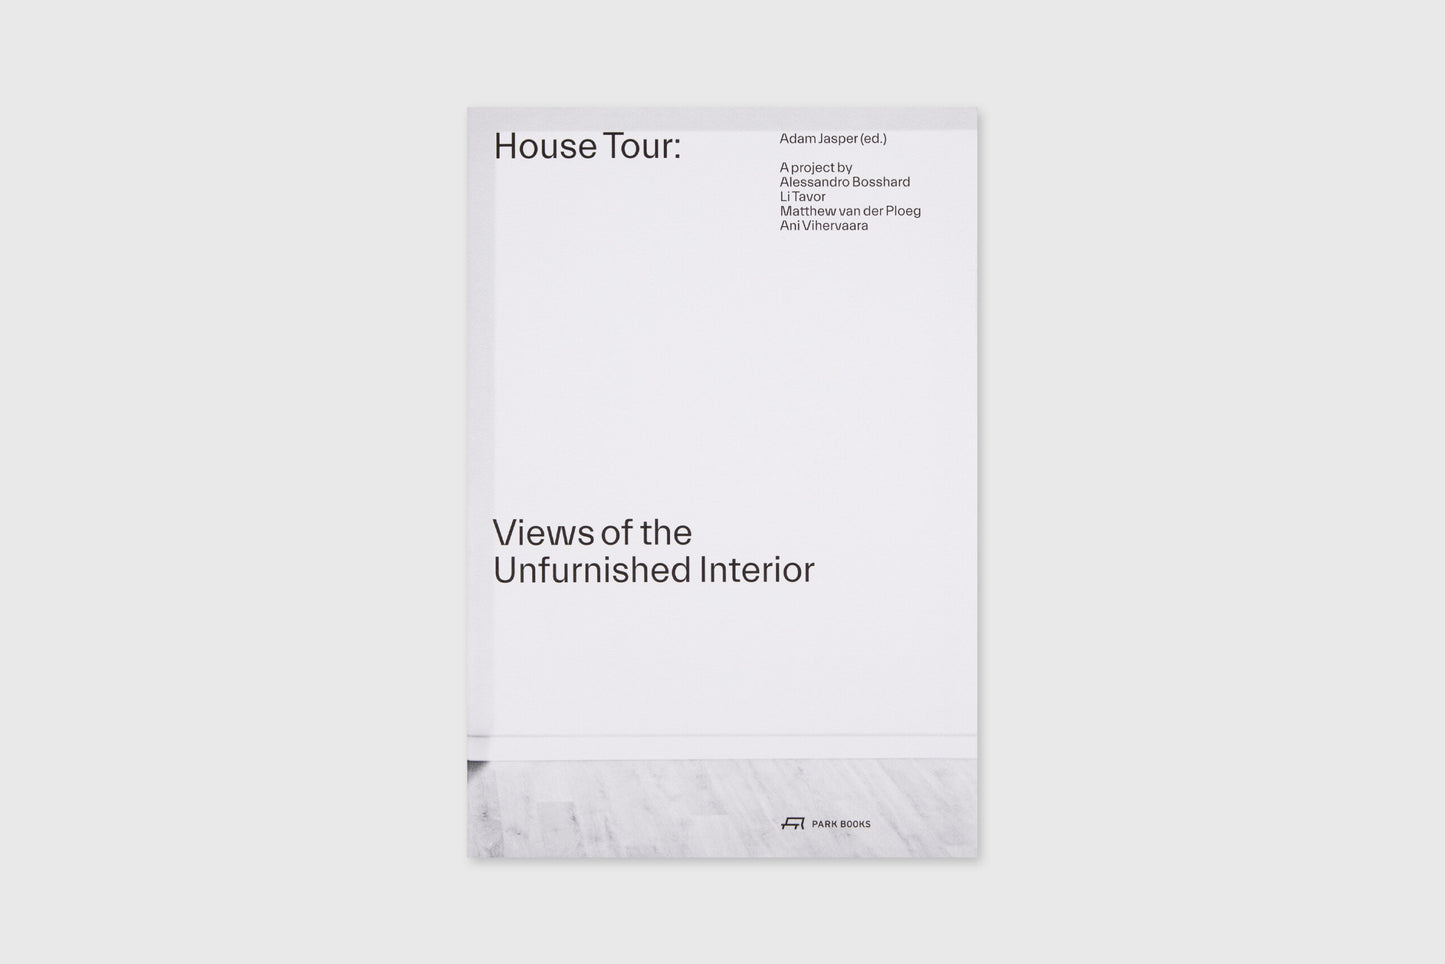 House Tour: Views of the Unfurnished Interior